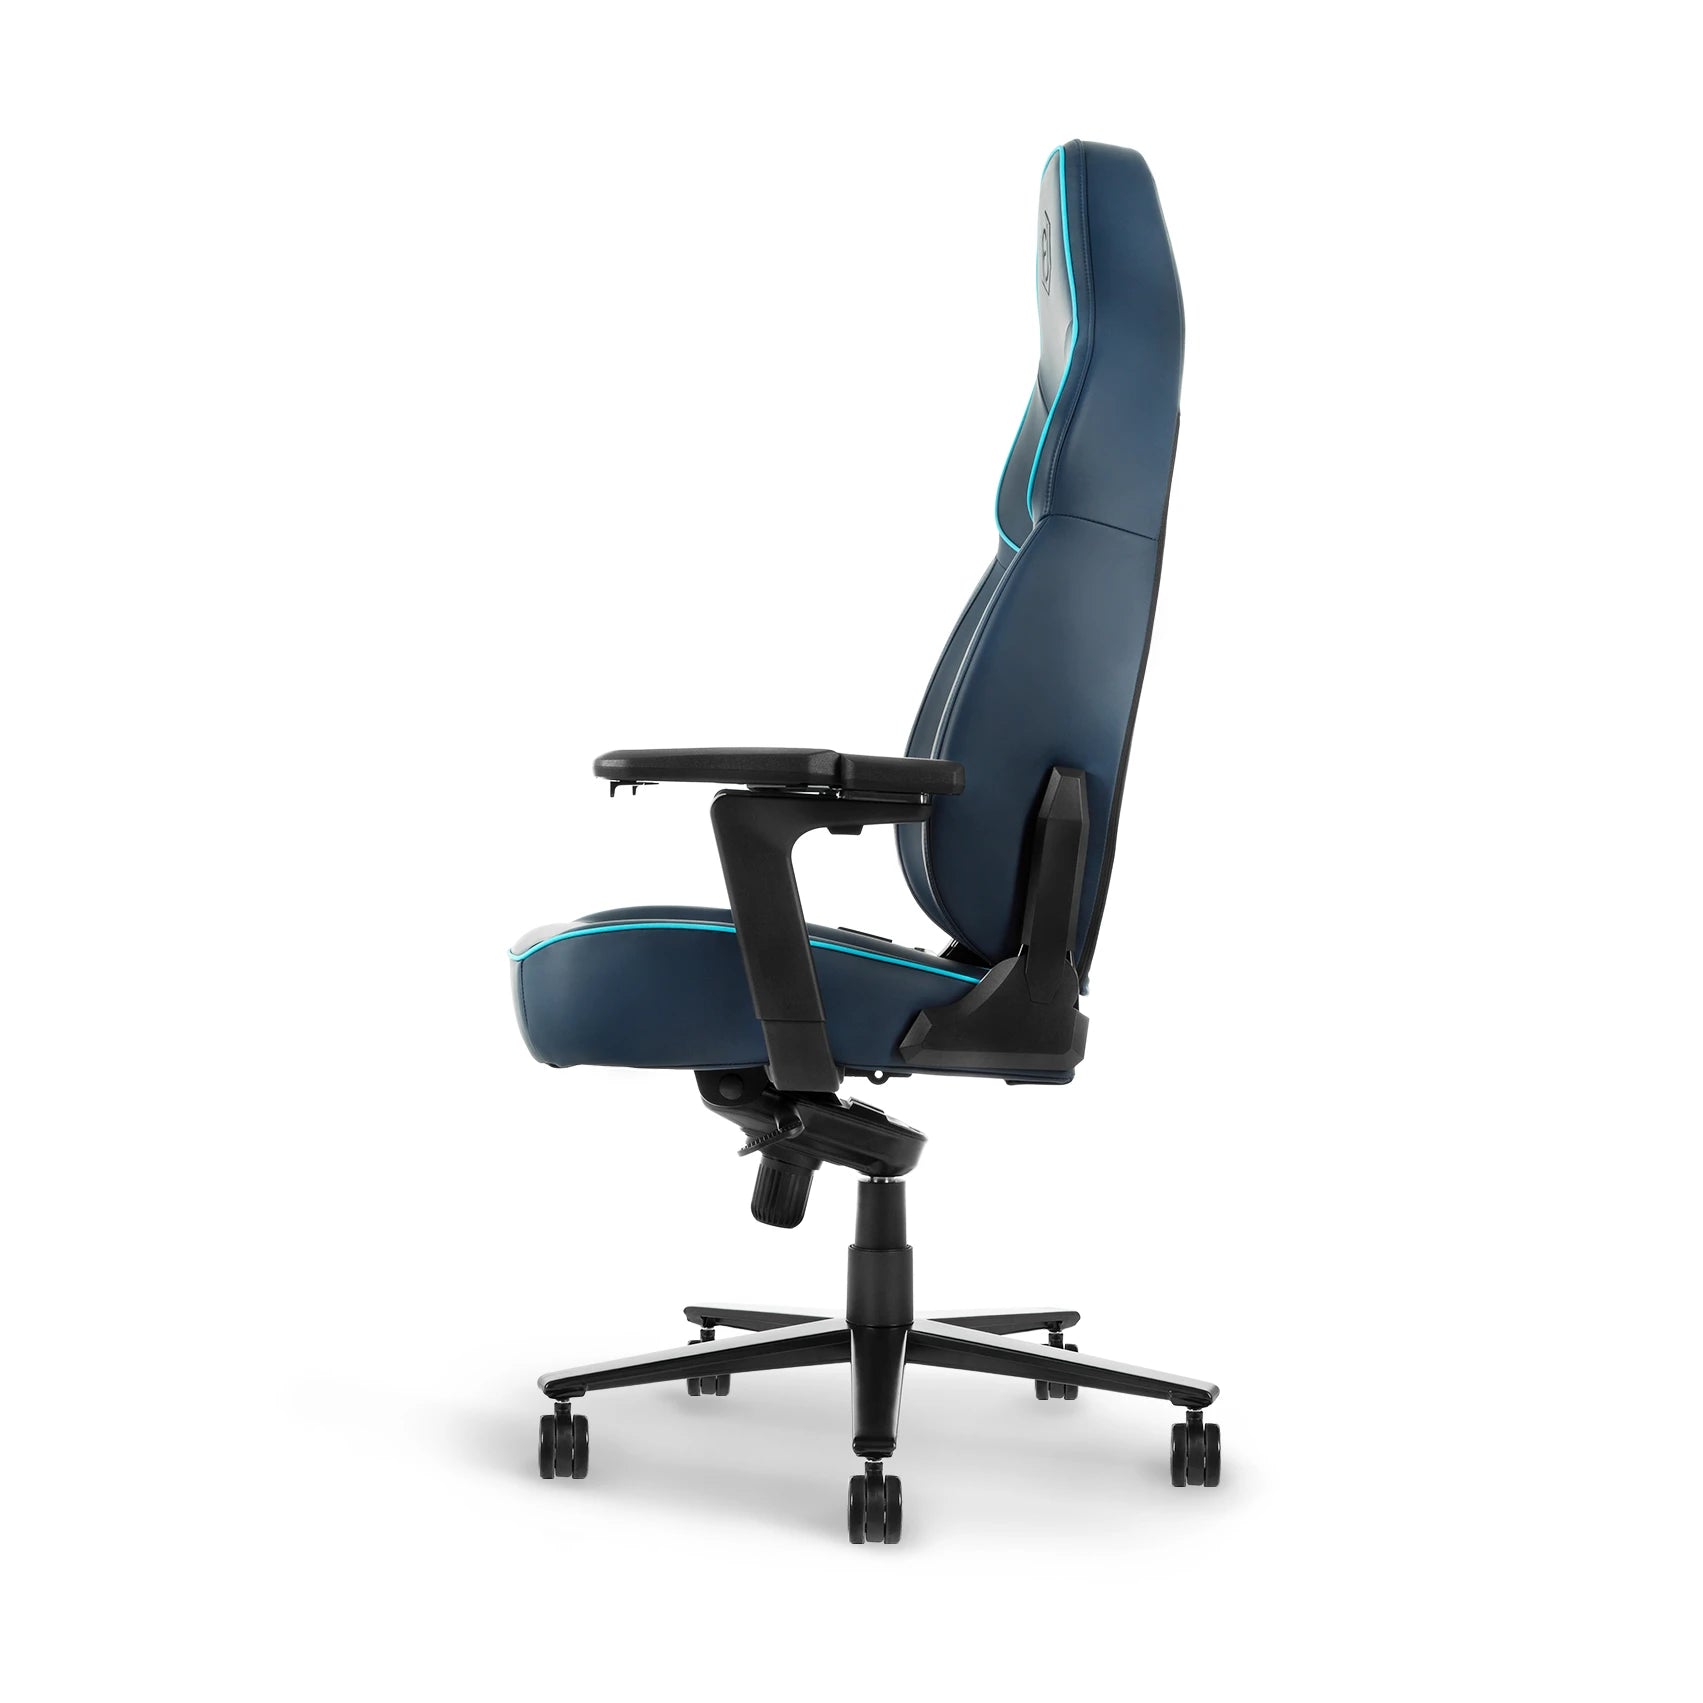 Profile view of a blue ergonomic gaming chair with contour lines and a sleek black frame.